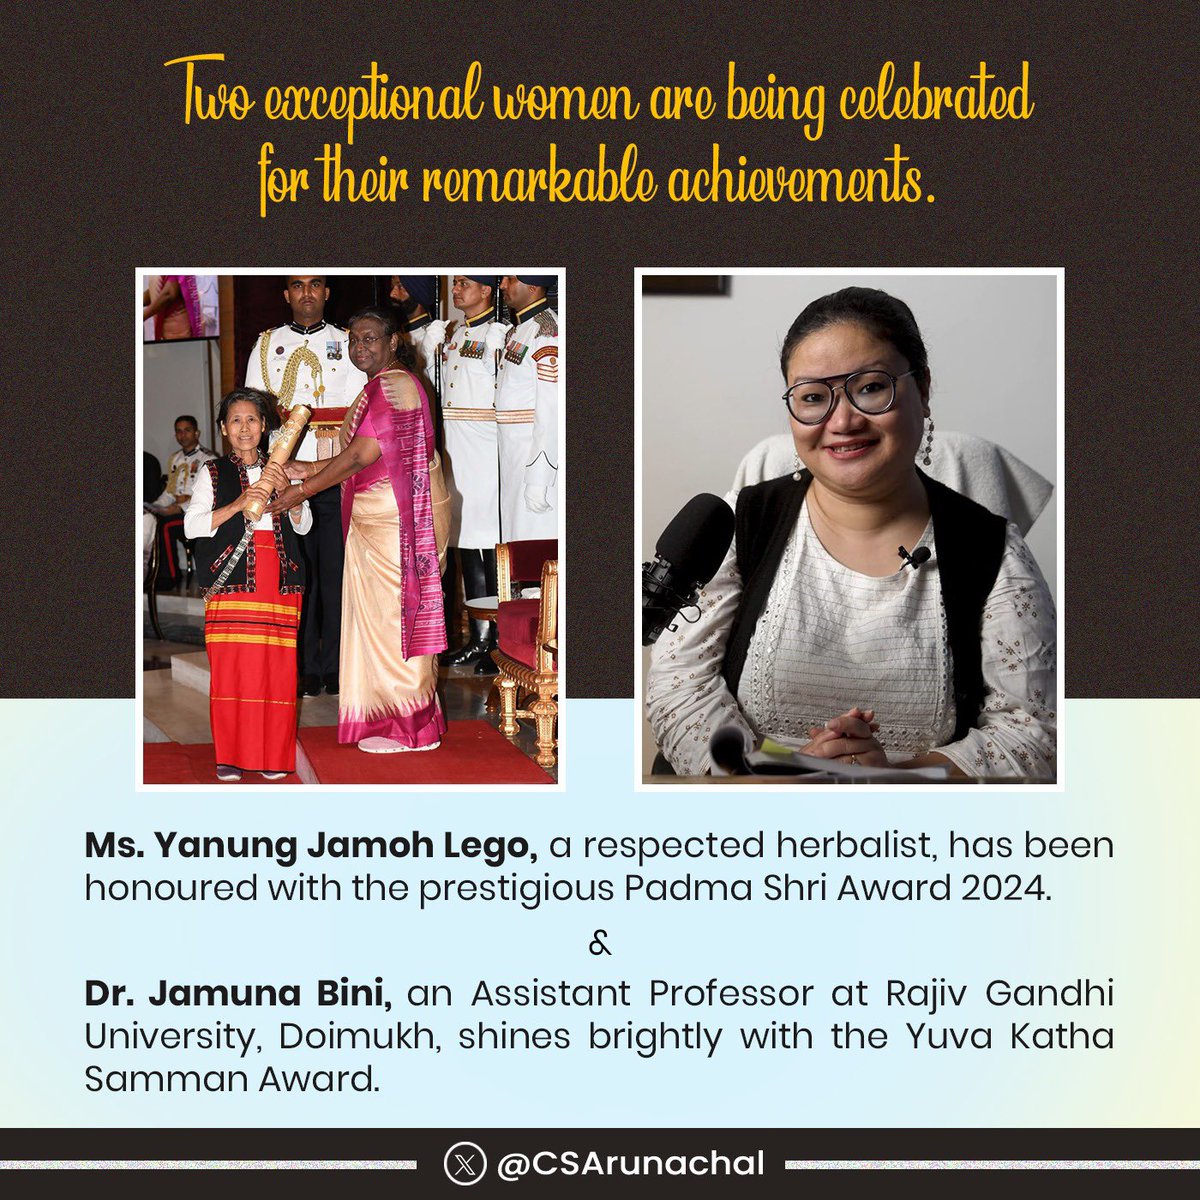 Congratulations to Ms. Yanung Jamoh Lego, a renowned herbalist, for receiving the prestigious #PadmaShri2024 in Agriculture, and to Dr. Jamuna Bini, Assistant Professor at Rajiv Gandhi University, Doimukh, for being honoured with the prestigious Yuva Katha Samman Award for her